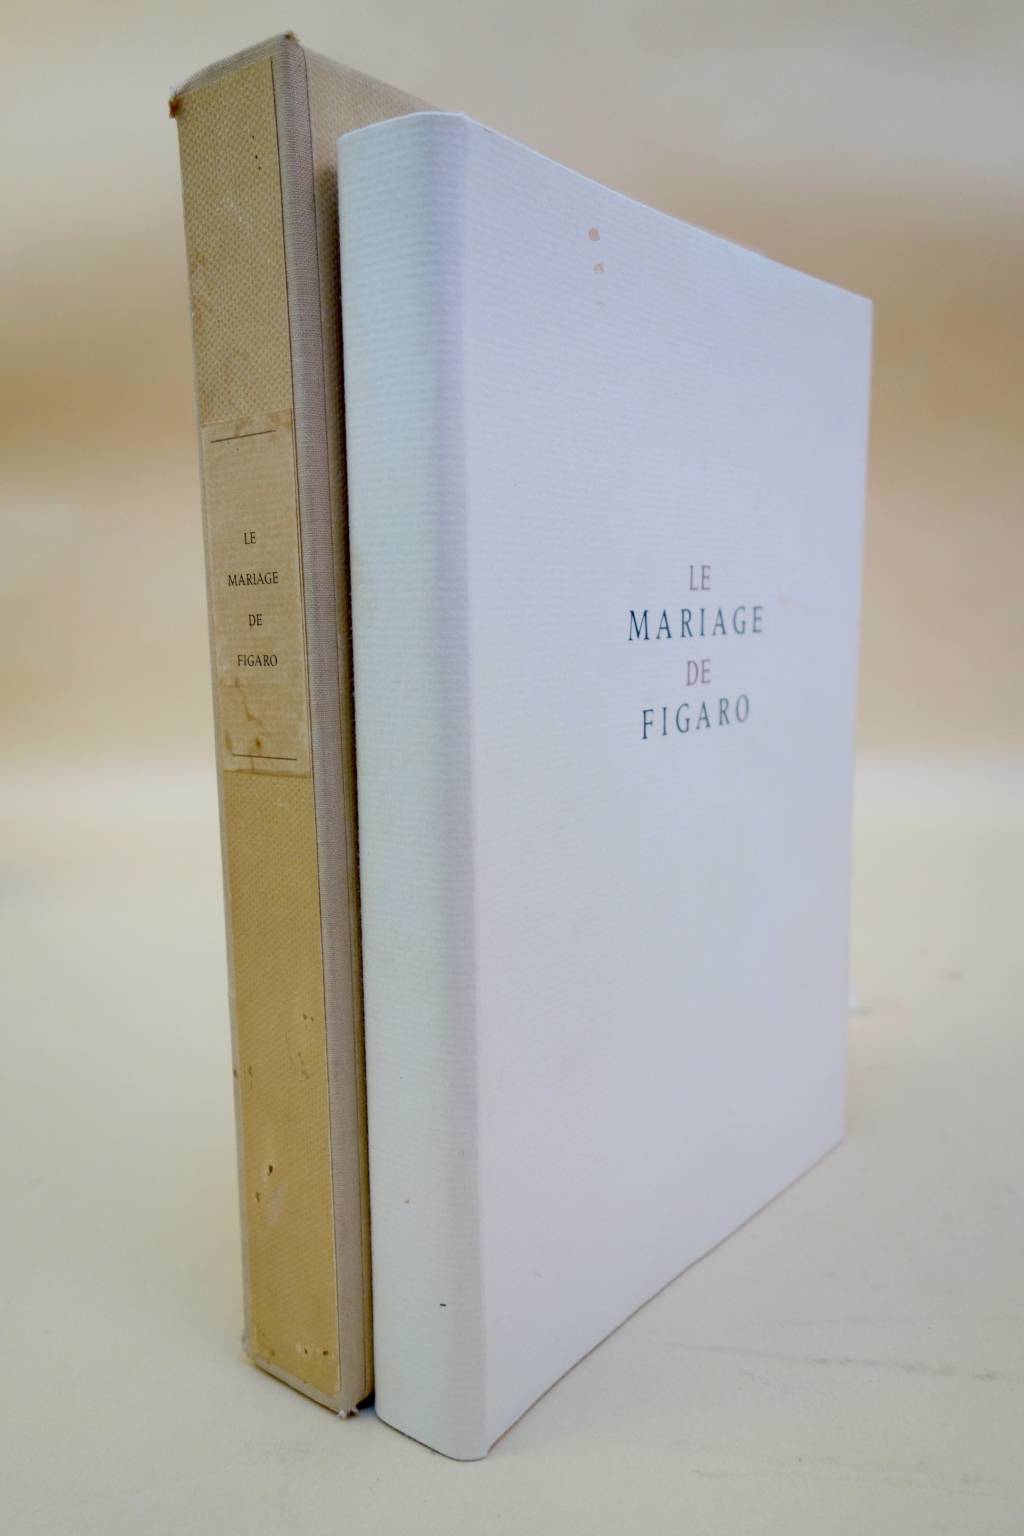 Photon deluxe Figaro cover and box